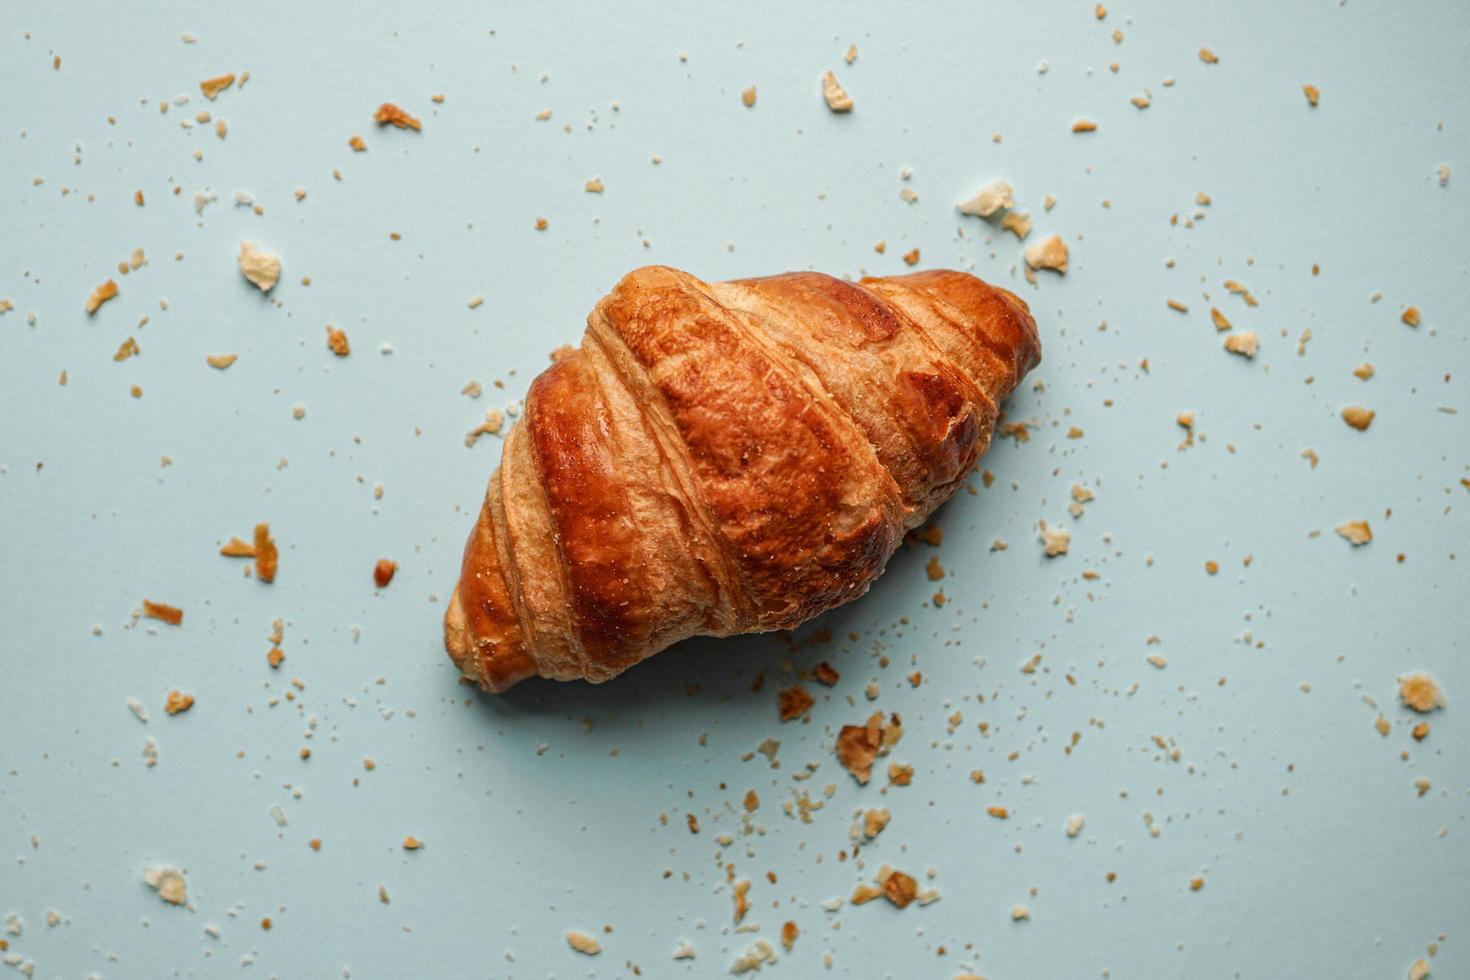 tasty croissant for breakfast, french food photo